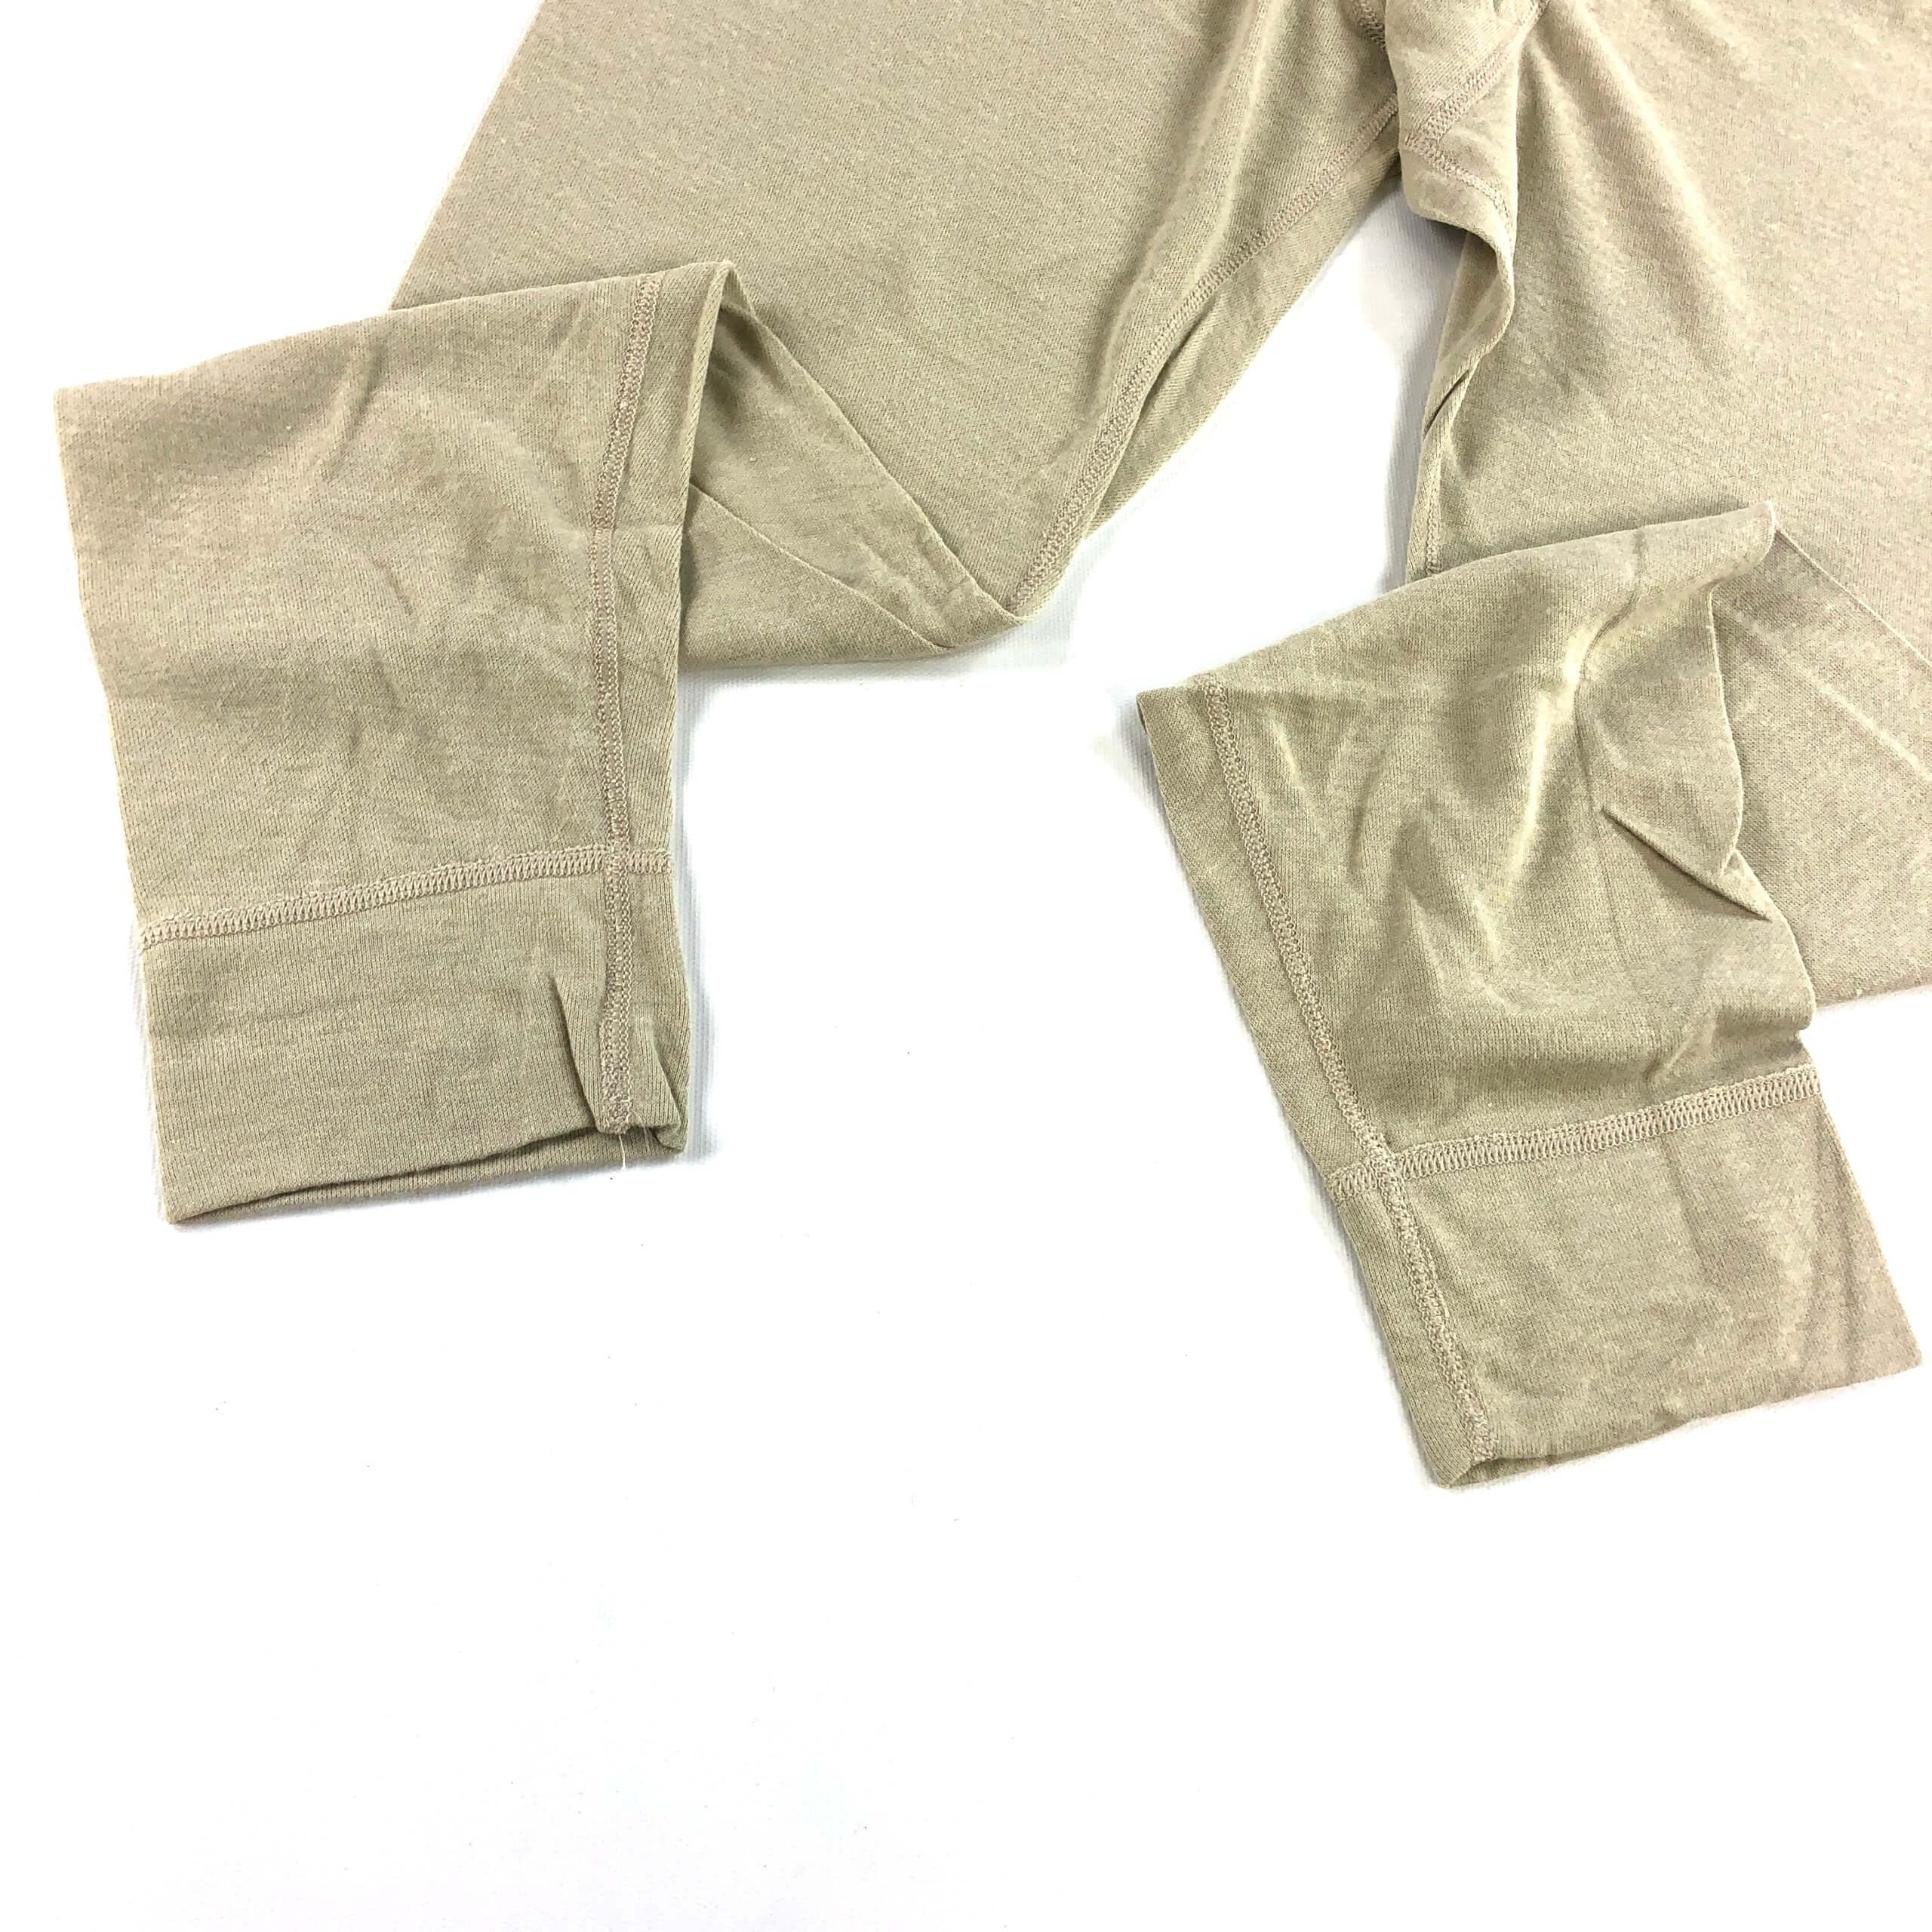 XGO Midweight Fire Resistant Bottoms, Desert Tan [Genuine Issue]